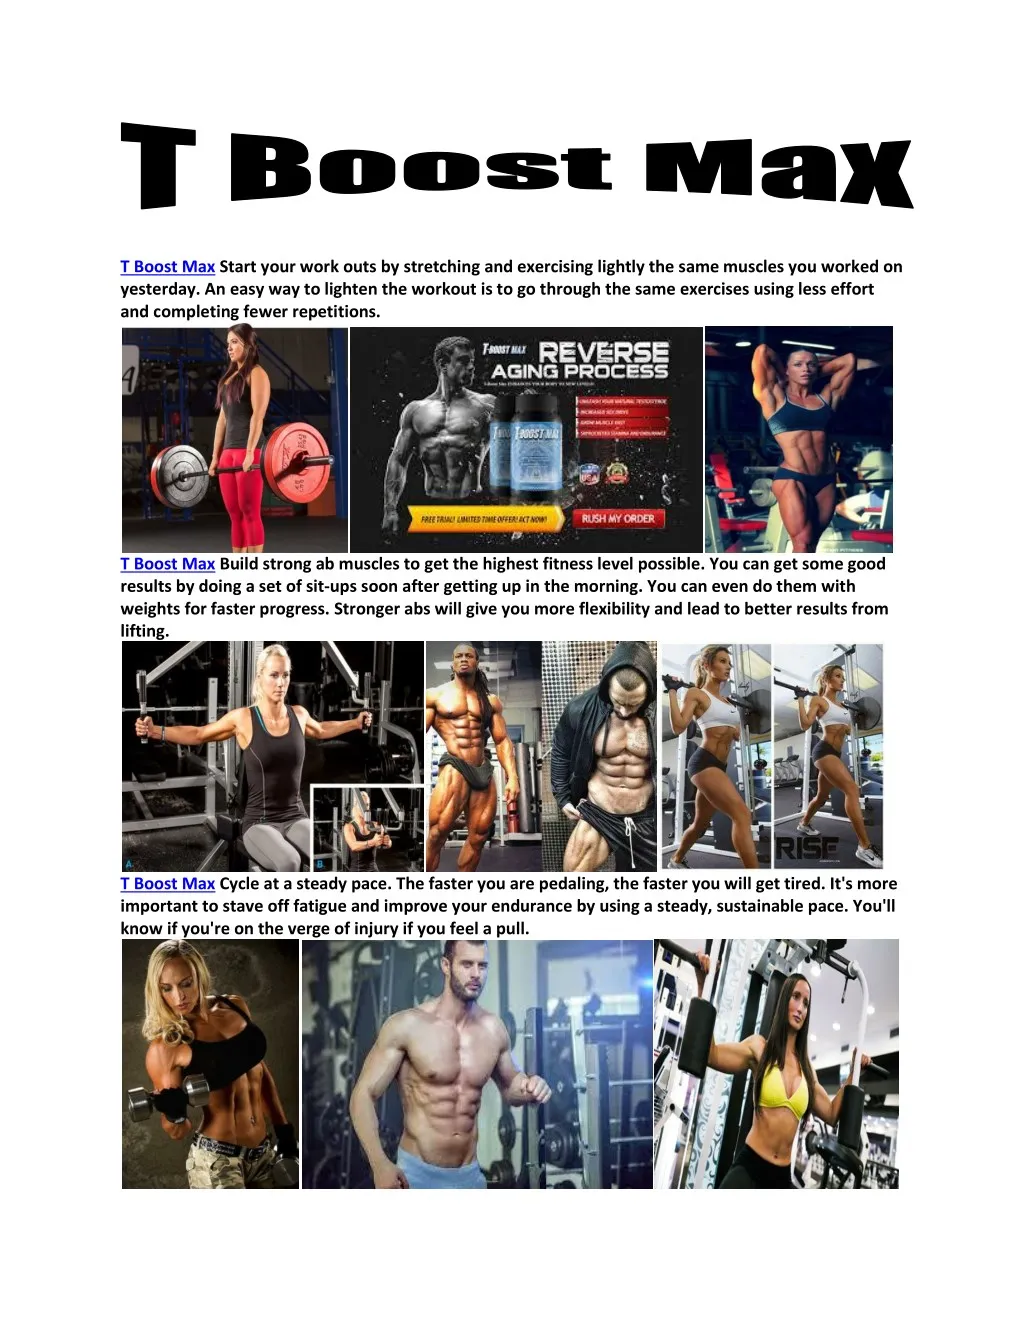 t boost max start your work outs by stretching